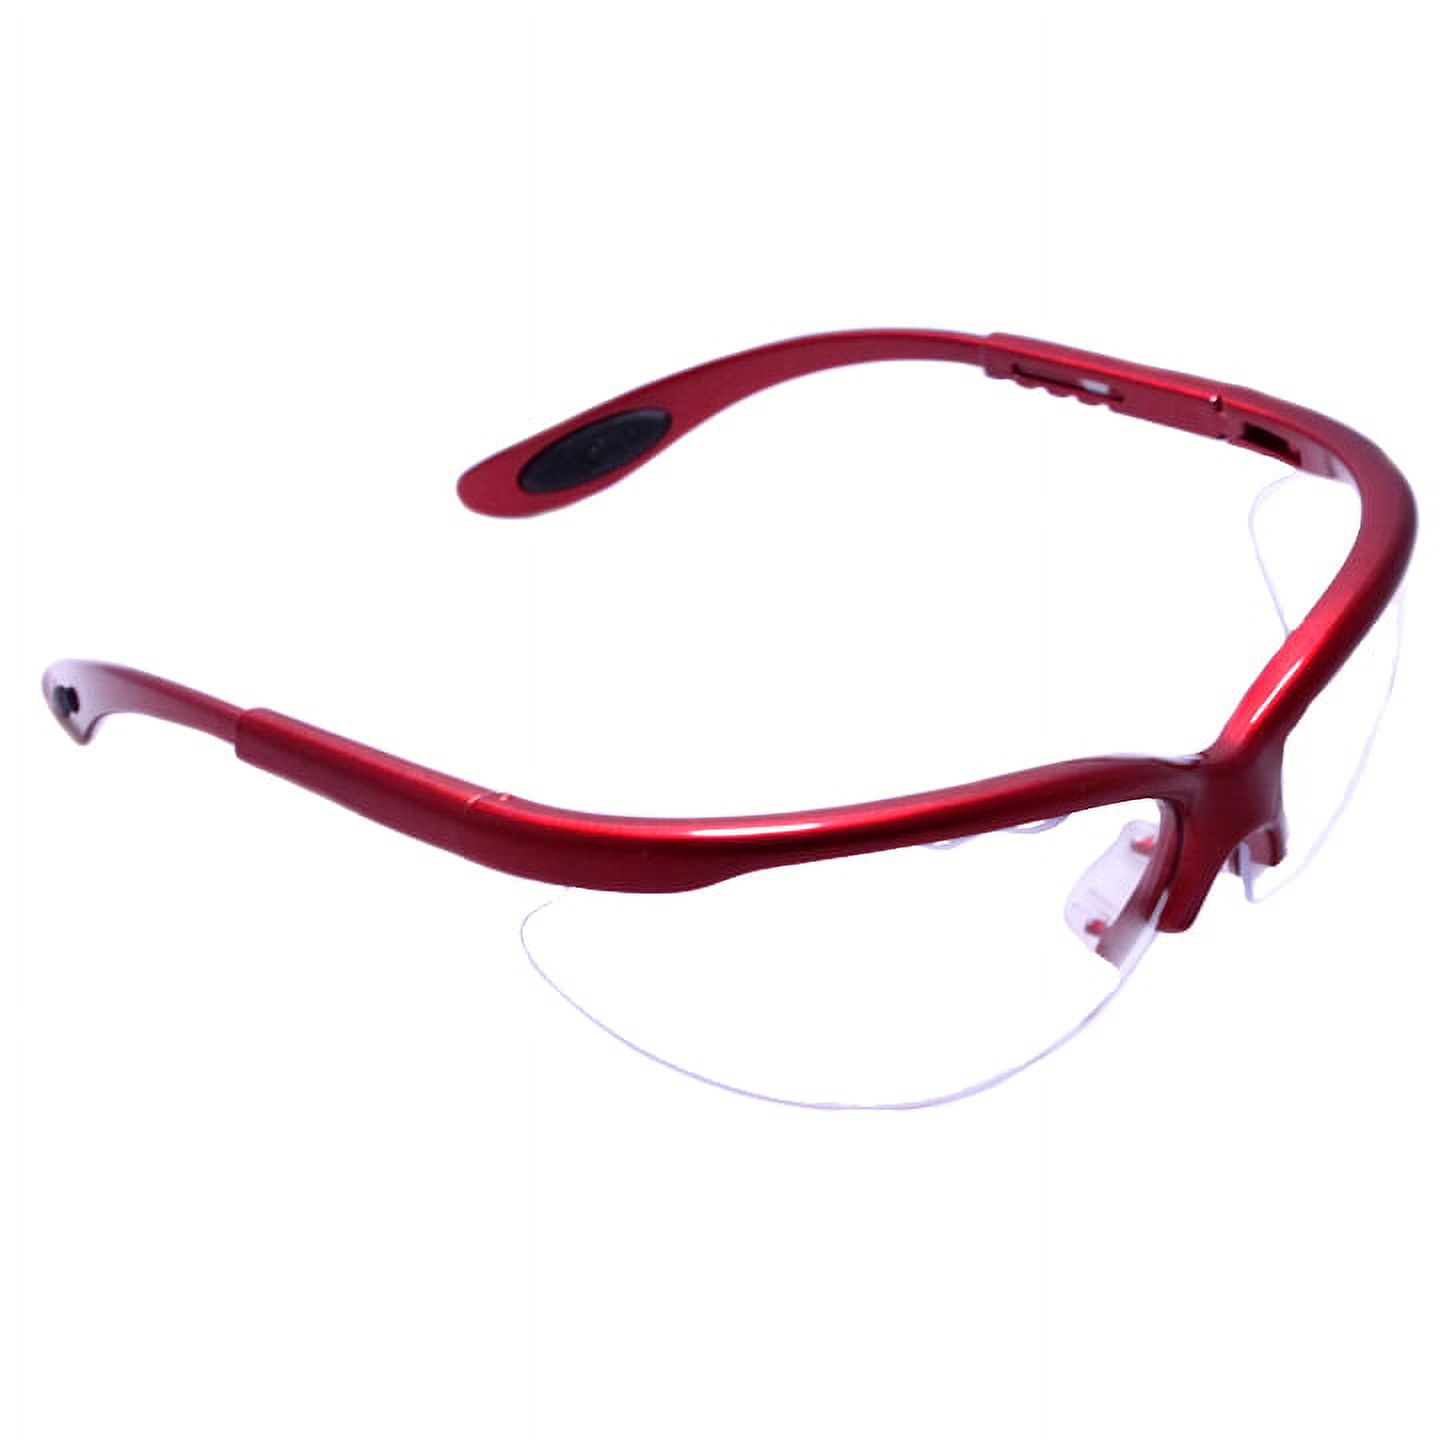 Python Xtreme View Protective Racquetball Eyeguard (Eyewear) (Red) - image 3 of 3